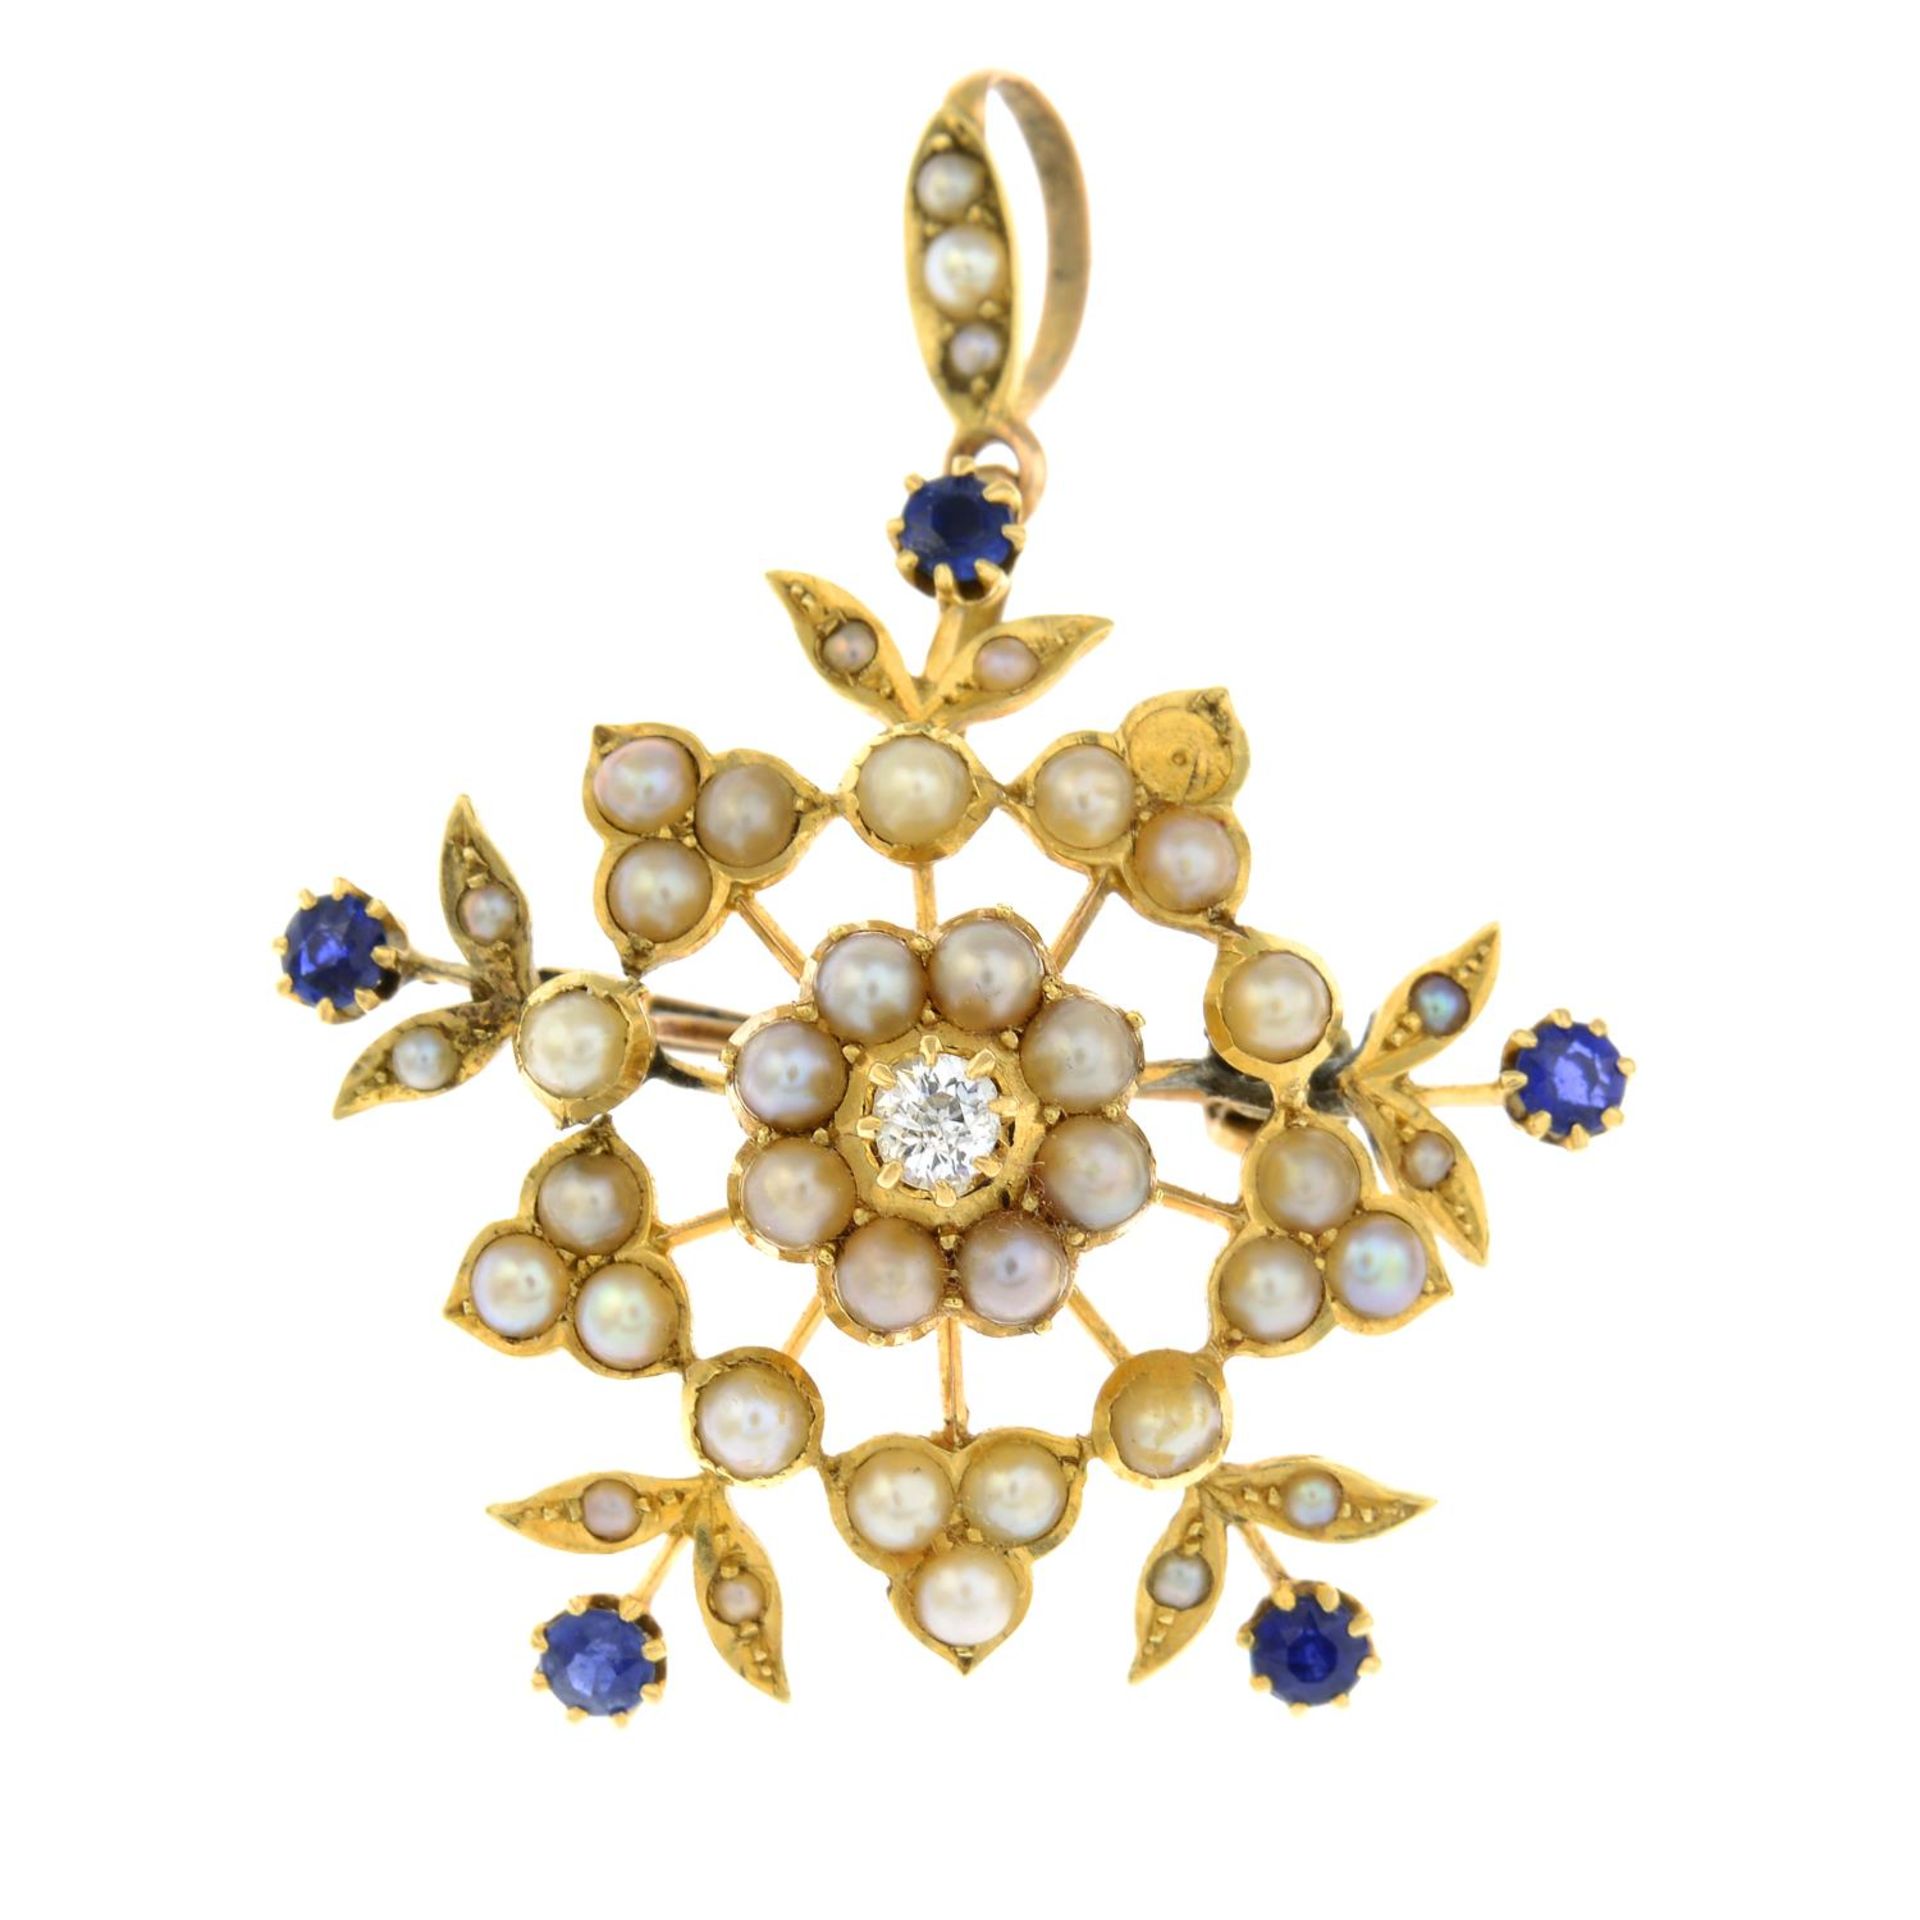 An early 20th century sapphire, split pearl and diamond floral cluster brooch.